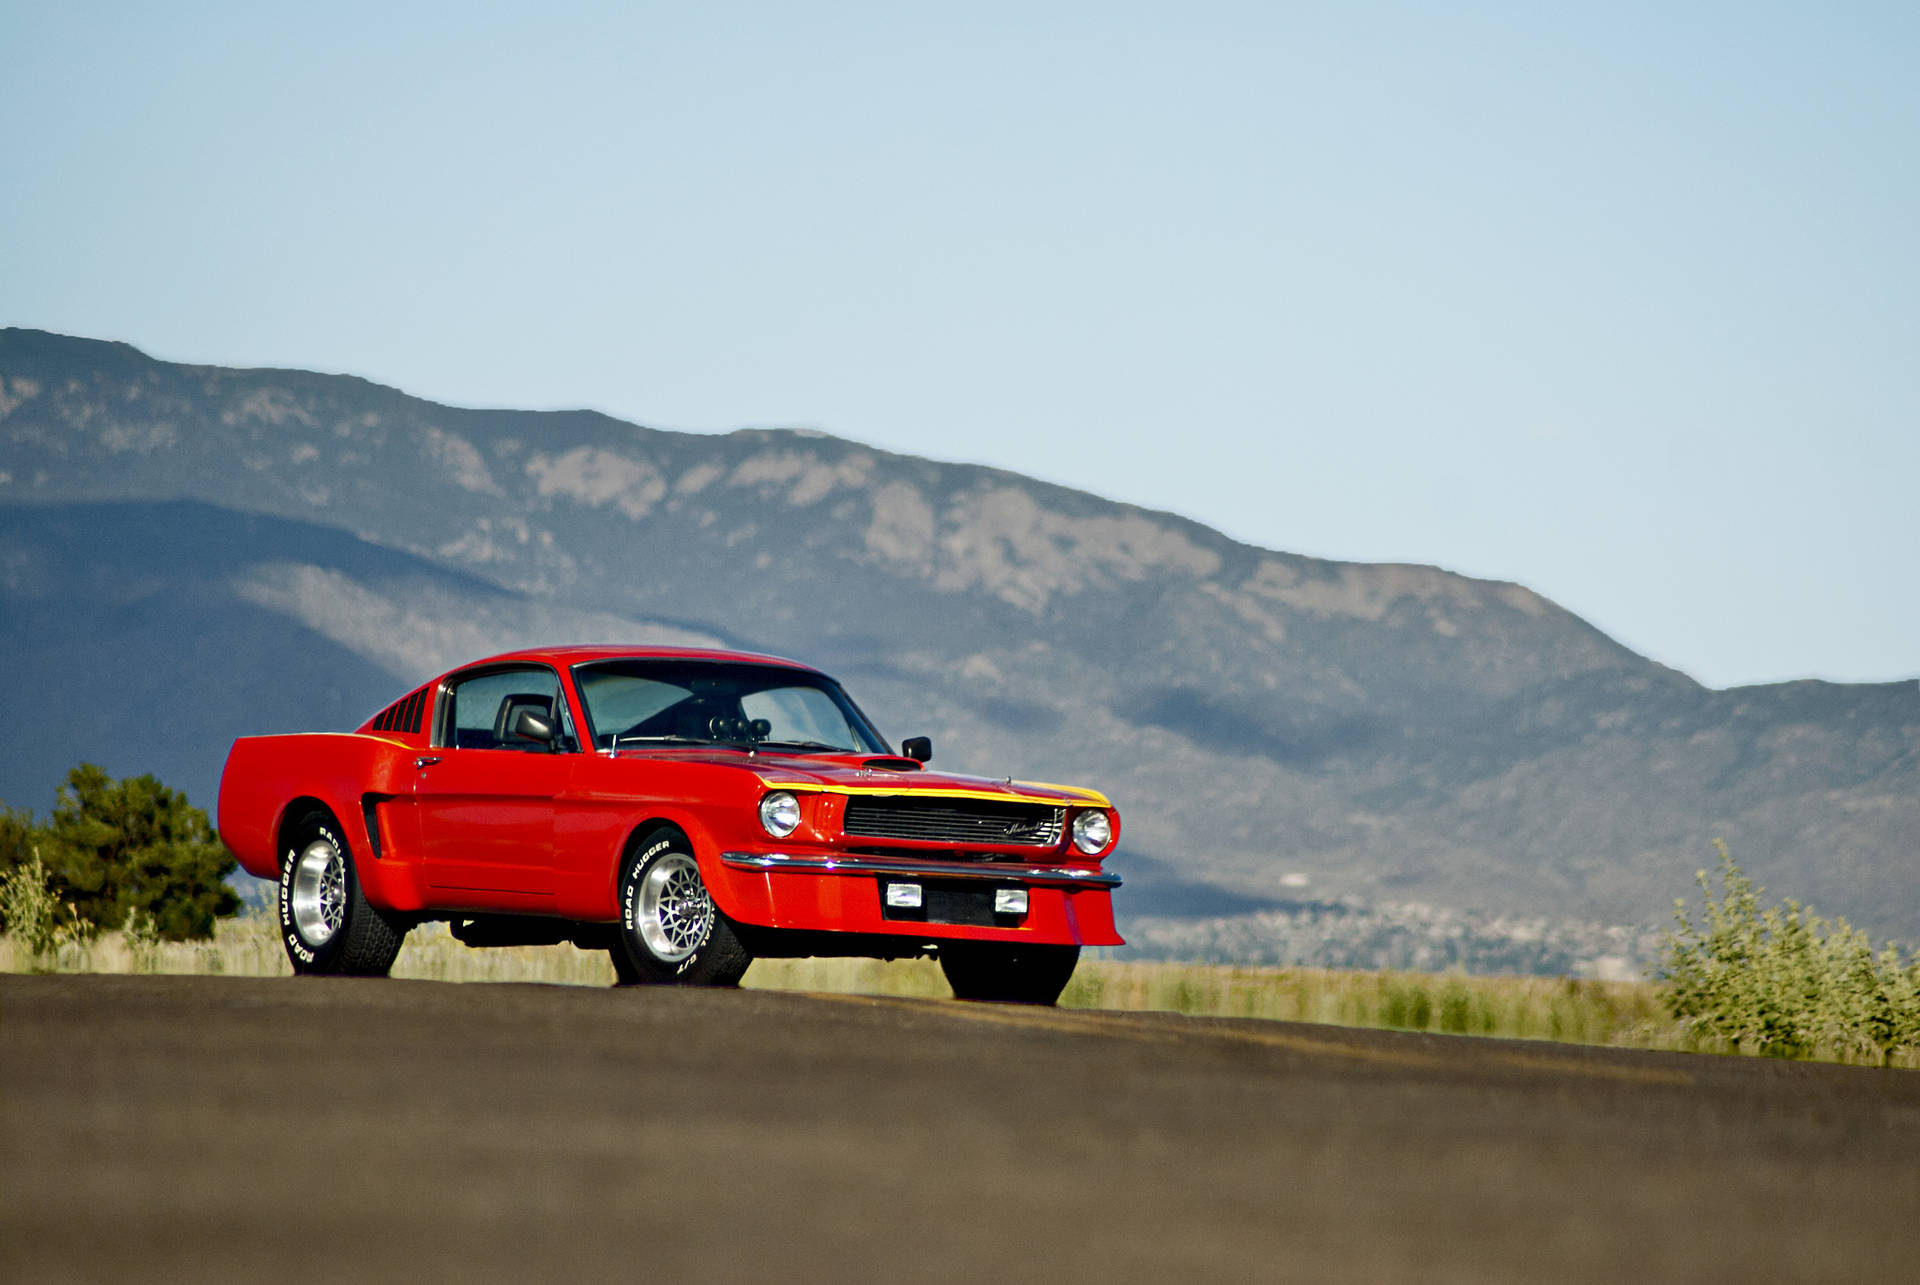 Vintage Red Ford Mustang 1965 Wallpaper